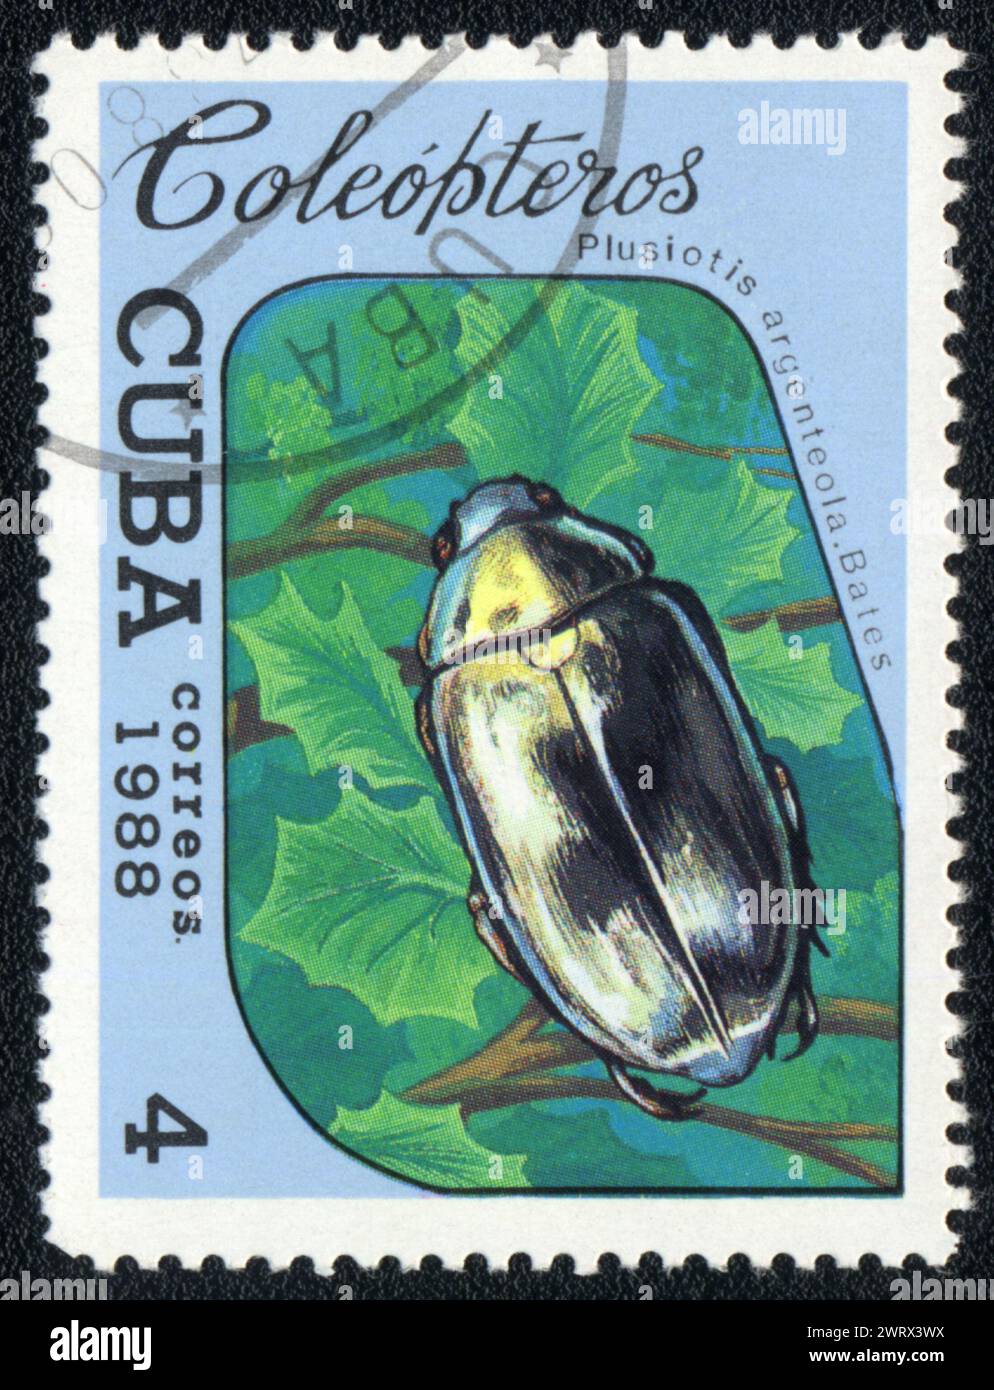 Postage stamp printed in CUBA shows image of a Chrysina (Plusiotis argenteola. Dales) beetle, from series - entomofauna, 1988 Stock Photo